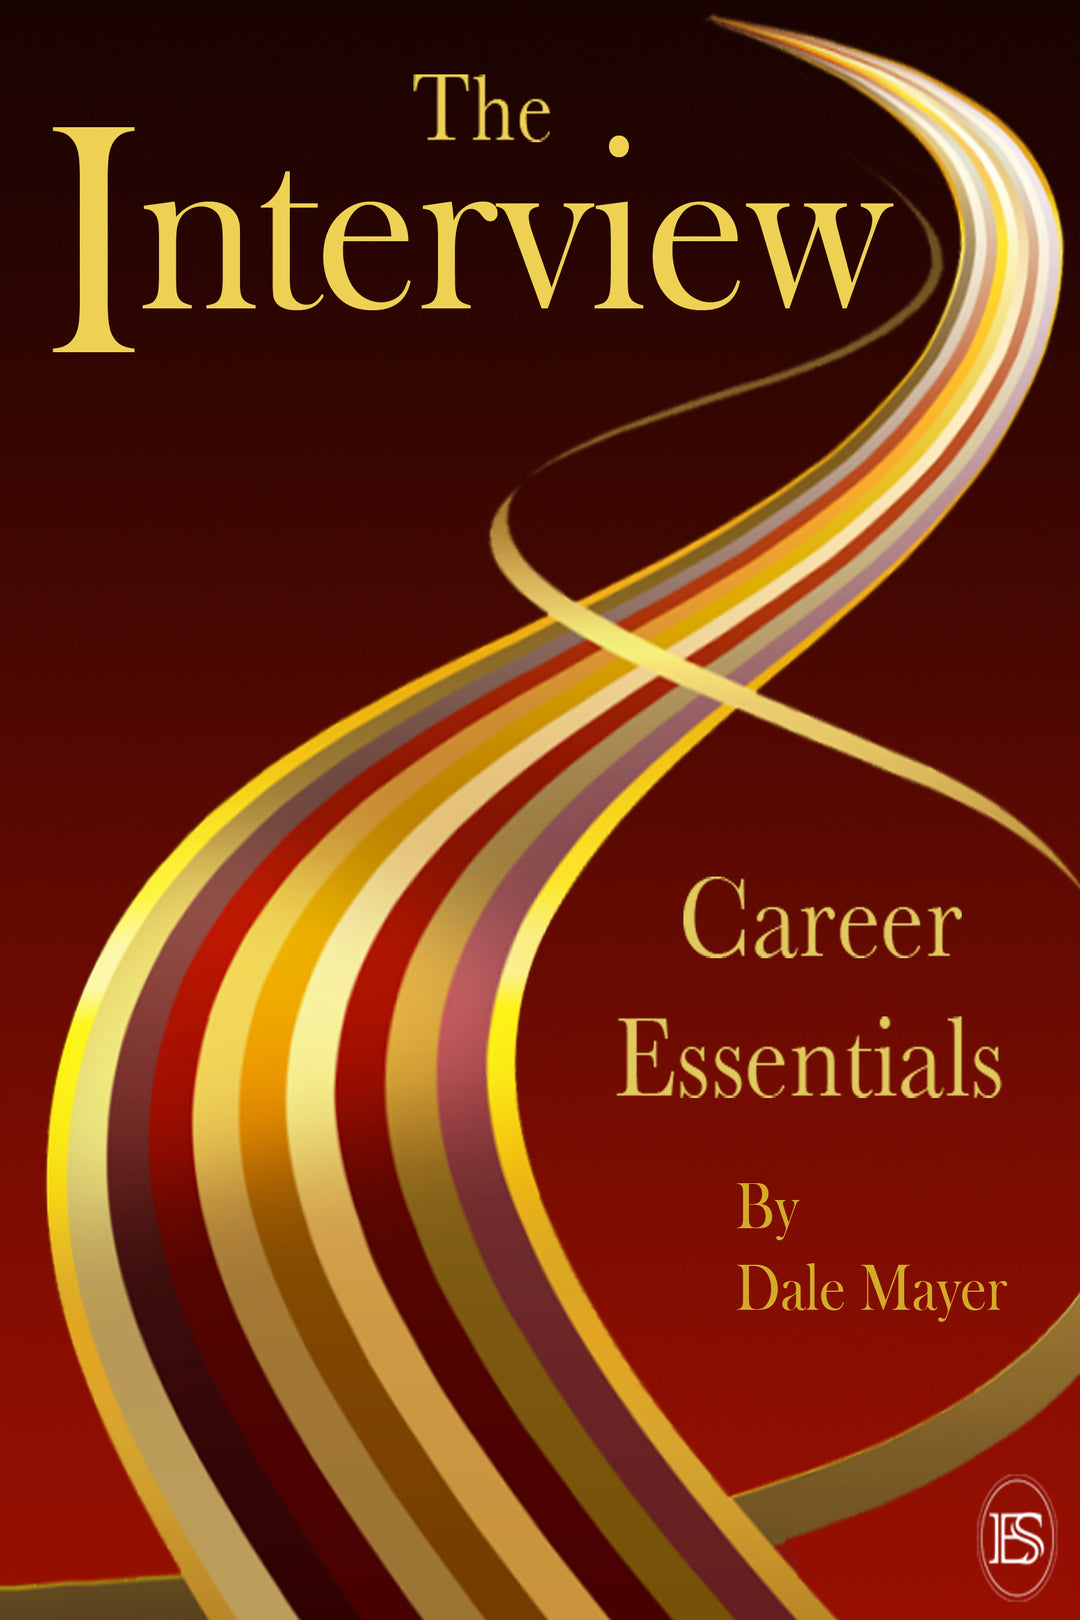 The Interview: Career Essentials Book 3 by Dale Mayer